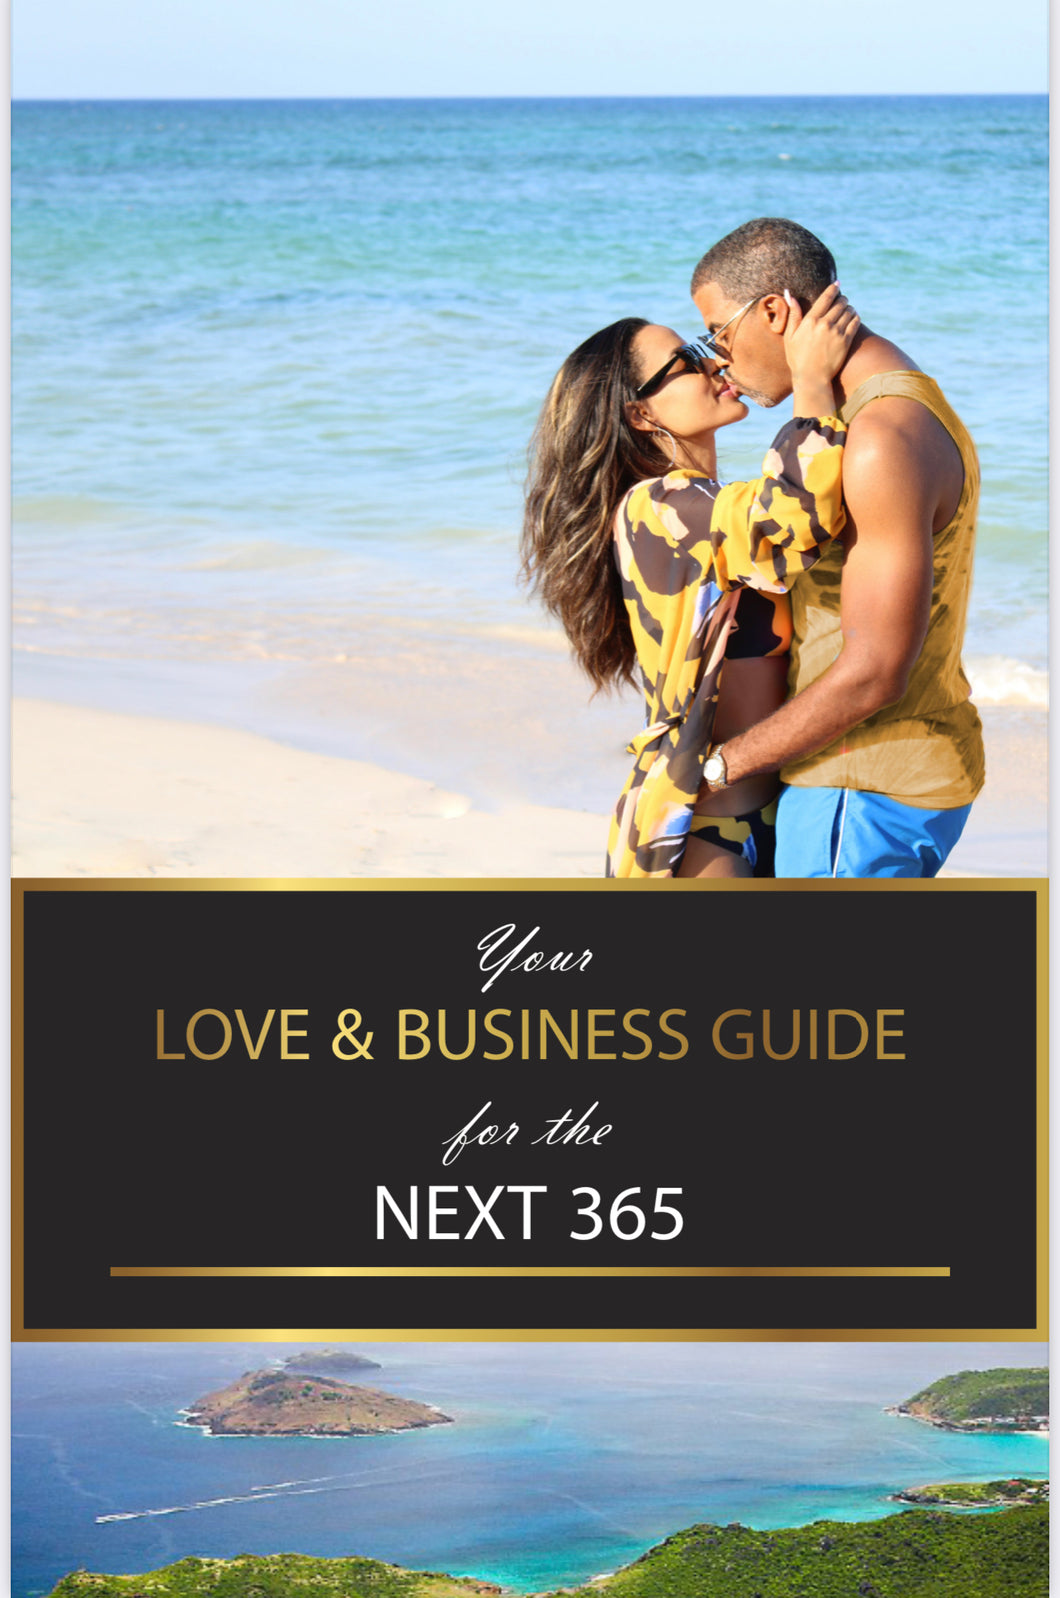 GUIDE- LOVE & BUSINESS GUIDE FOR THE NEXT 365